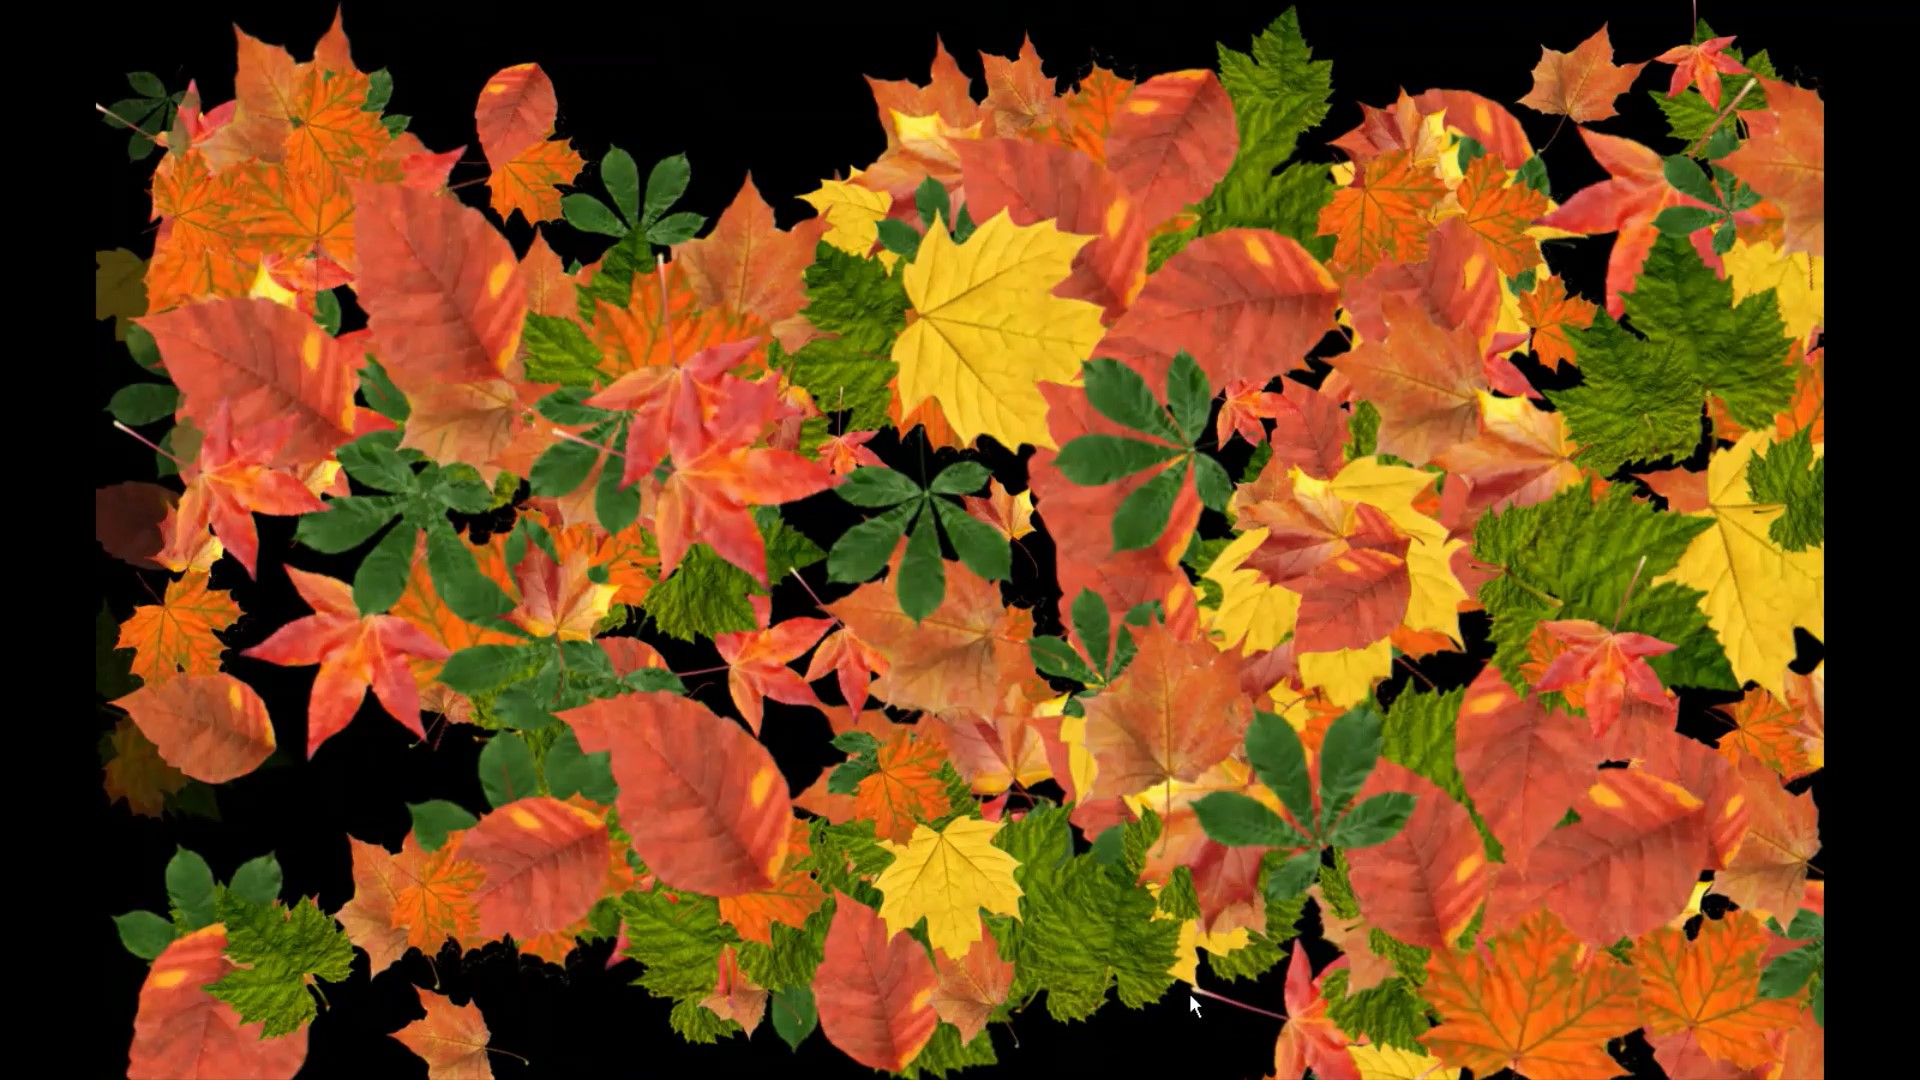 The scatter theme features different objects that can be scattered around the interactive projection, this image shows a pile of leaves that when the user touches with there hands or a brush will sweep into a virtual pile, the leaves will provide a rustling sound feedback.